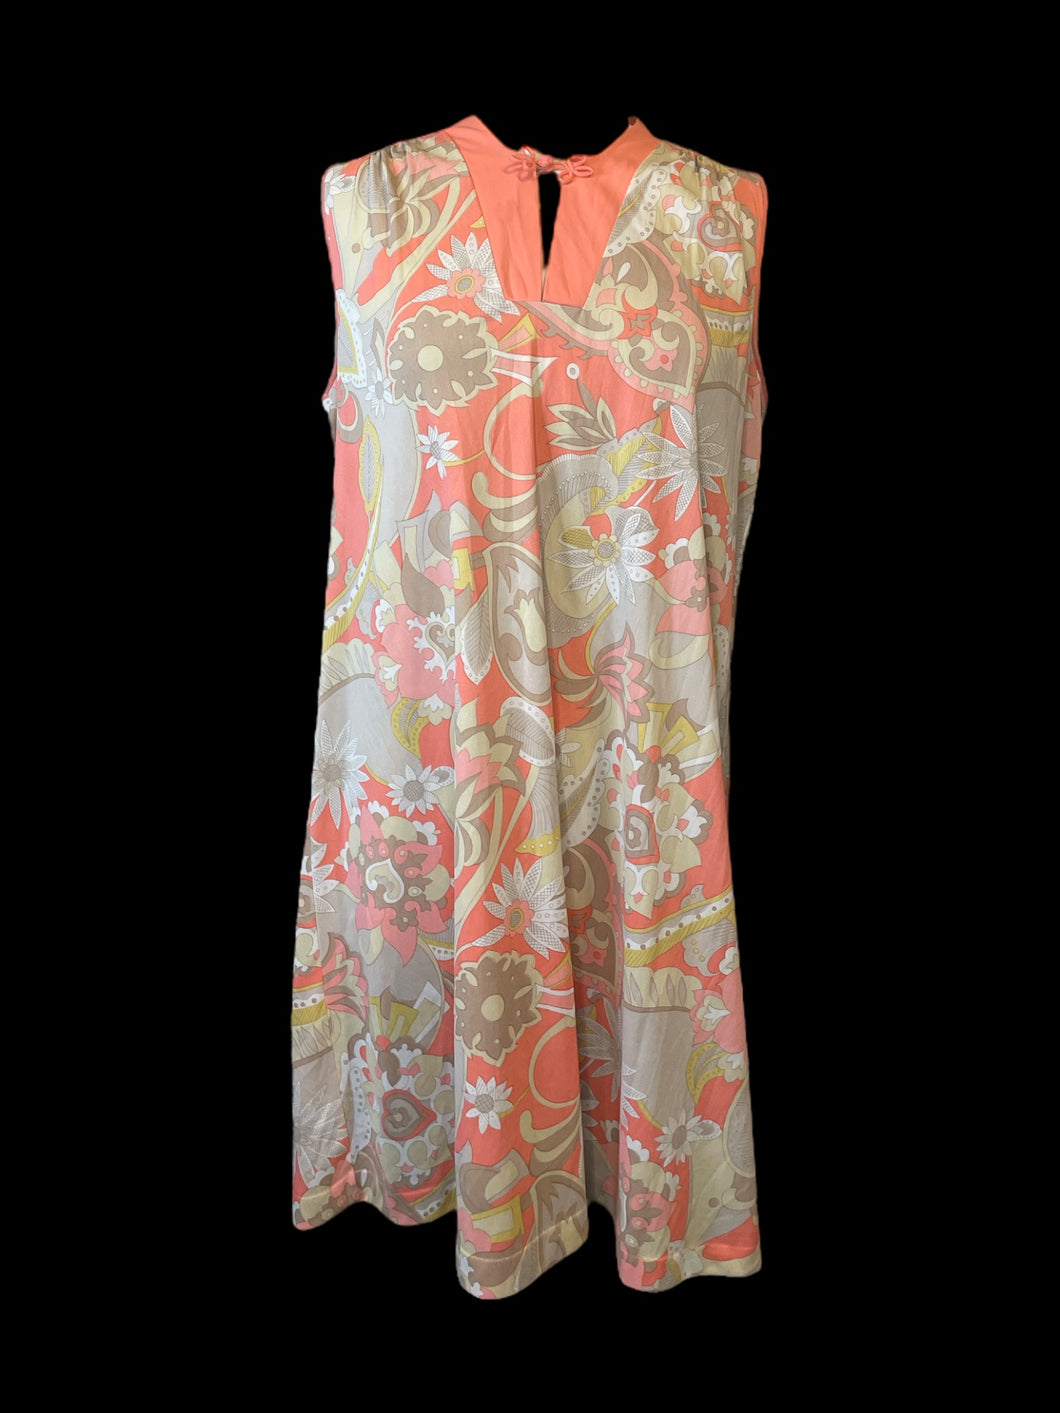 0X Vintage pink, beige, & yellow paisley sleeveless dress w/ frog button closure